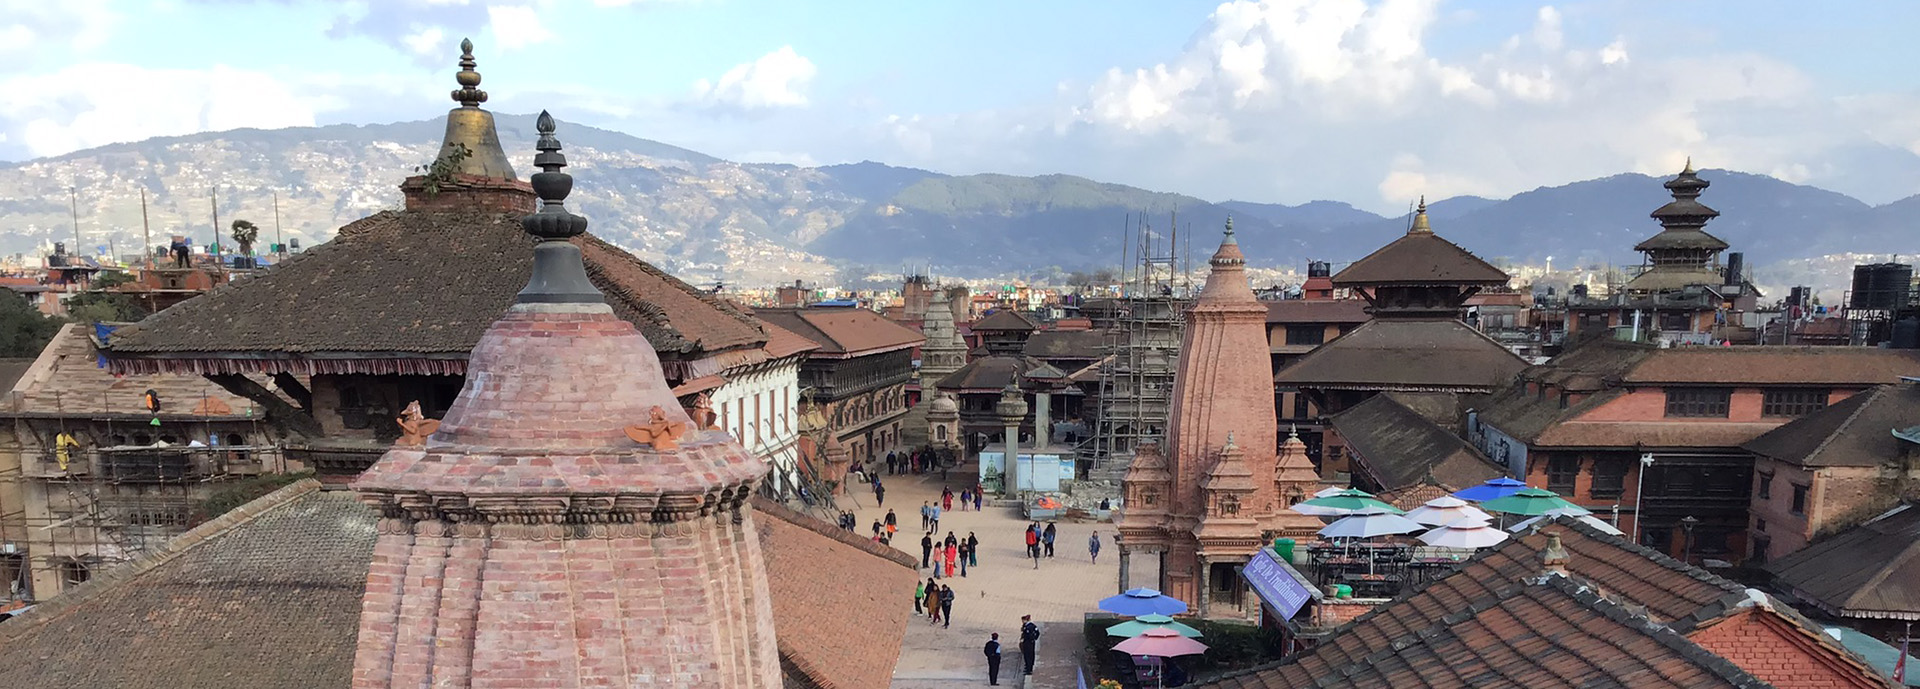 Puja and permission: rituals of authorisation in reconstruction of built heritage in Bhaktapur, Nepal